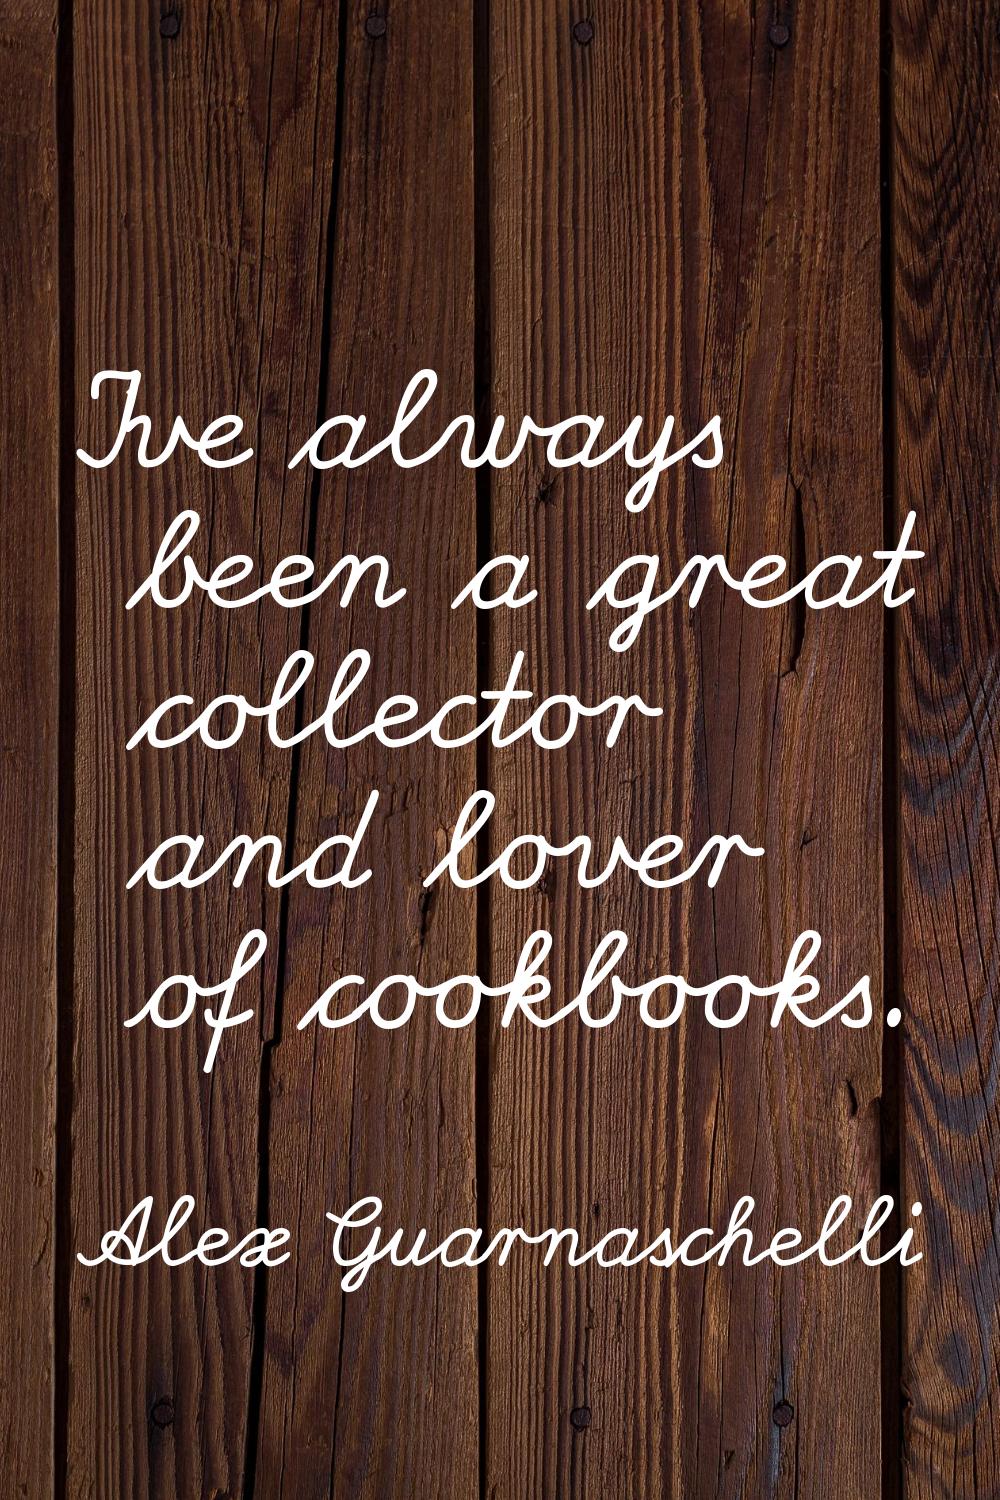 I've always been a great collector and lover of cookbooks.